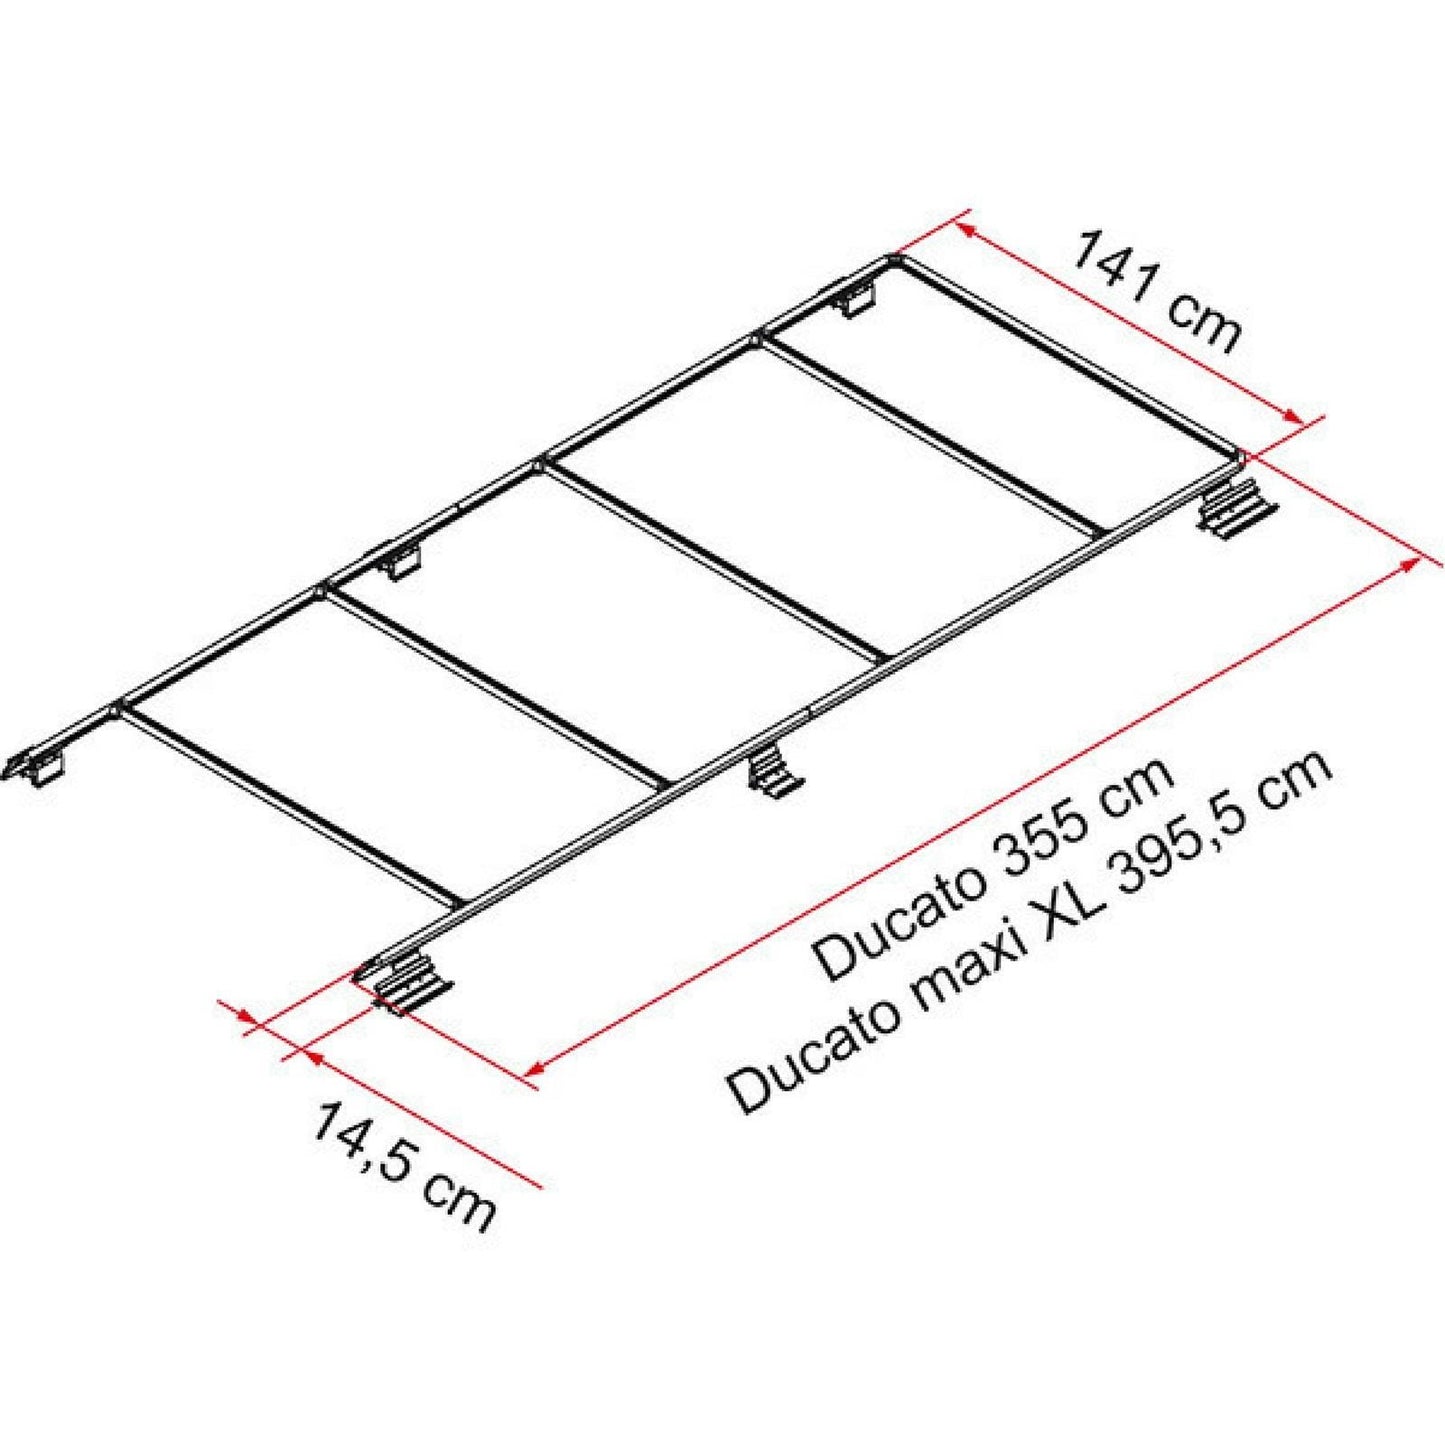 Fiamma Fiat Ducato Roof Rail made by Fiamma. A Add-ons sold by Quality Caravan Awnings